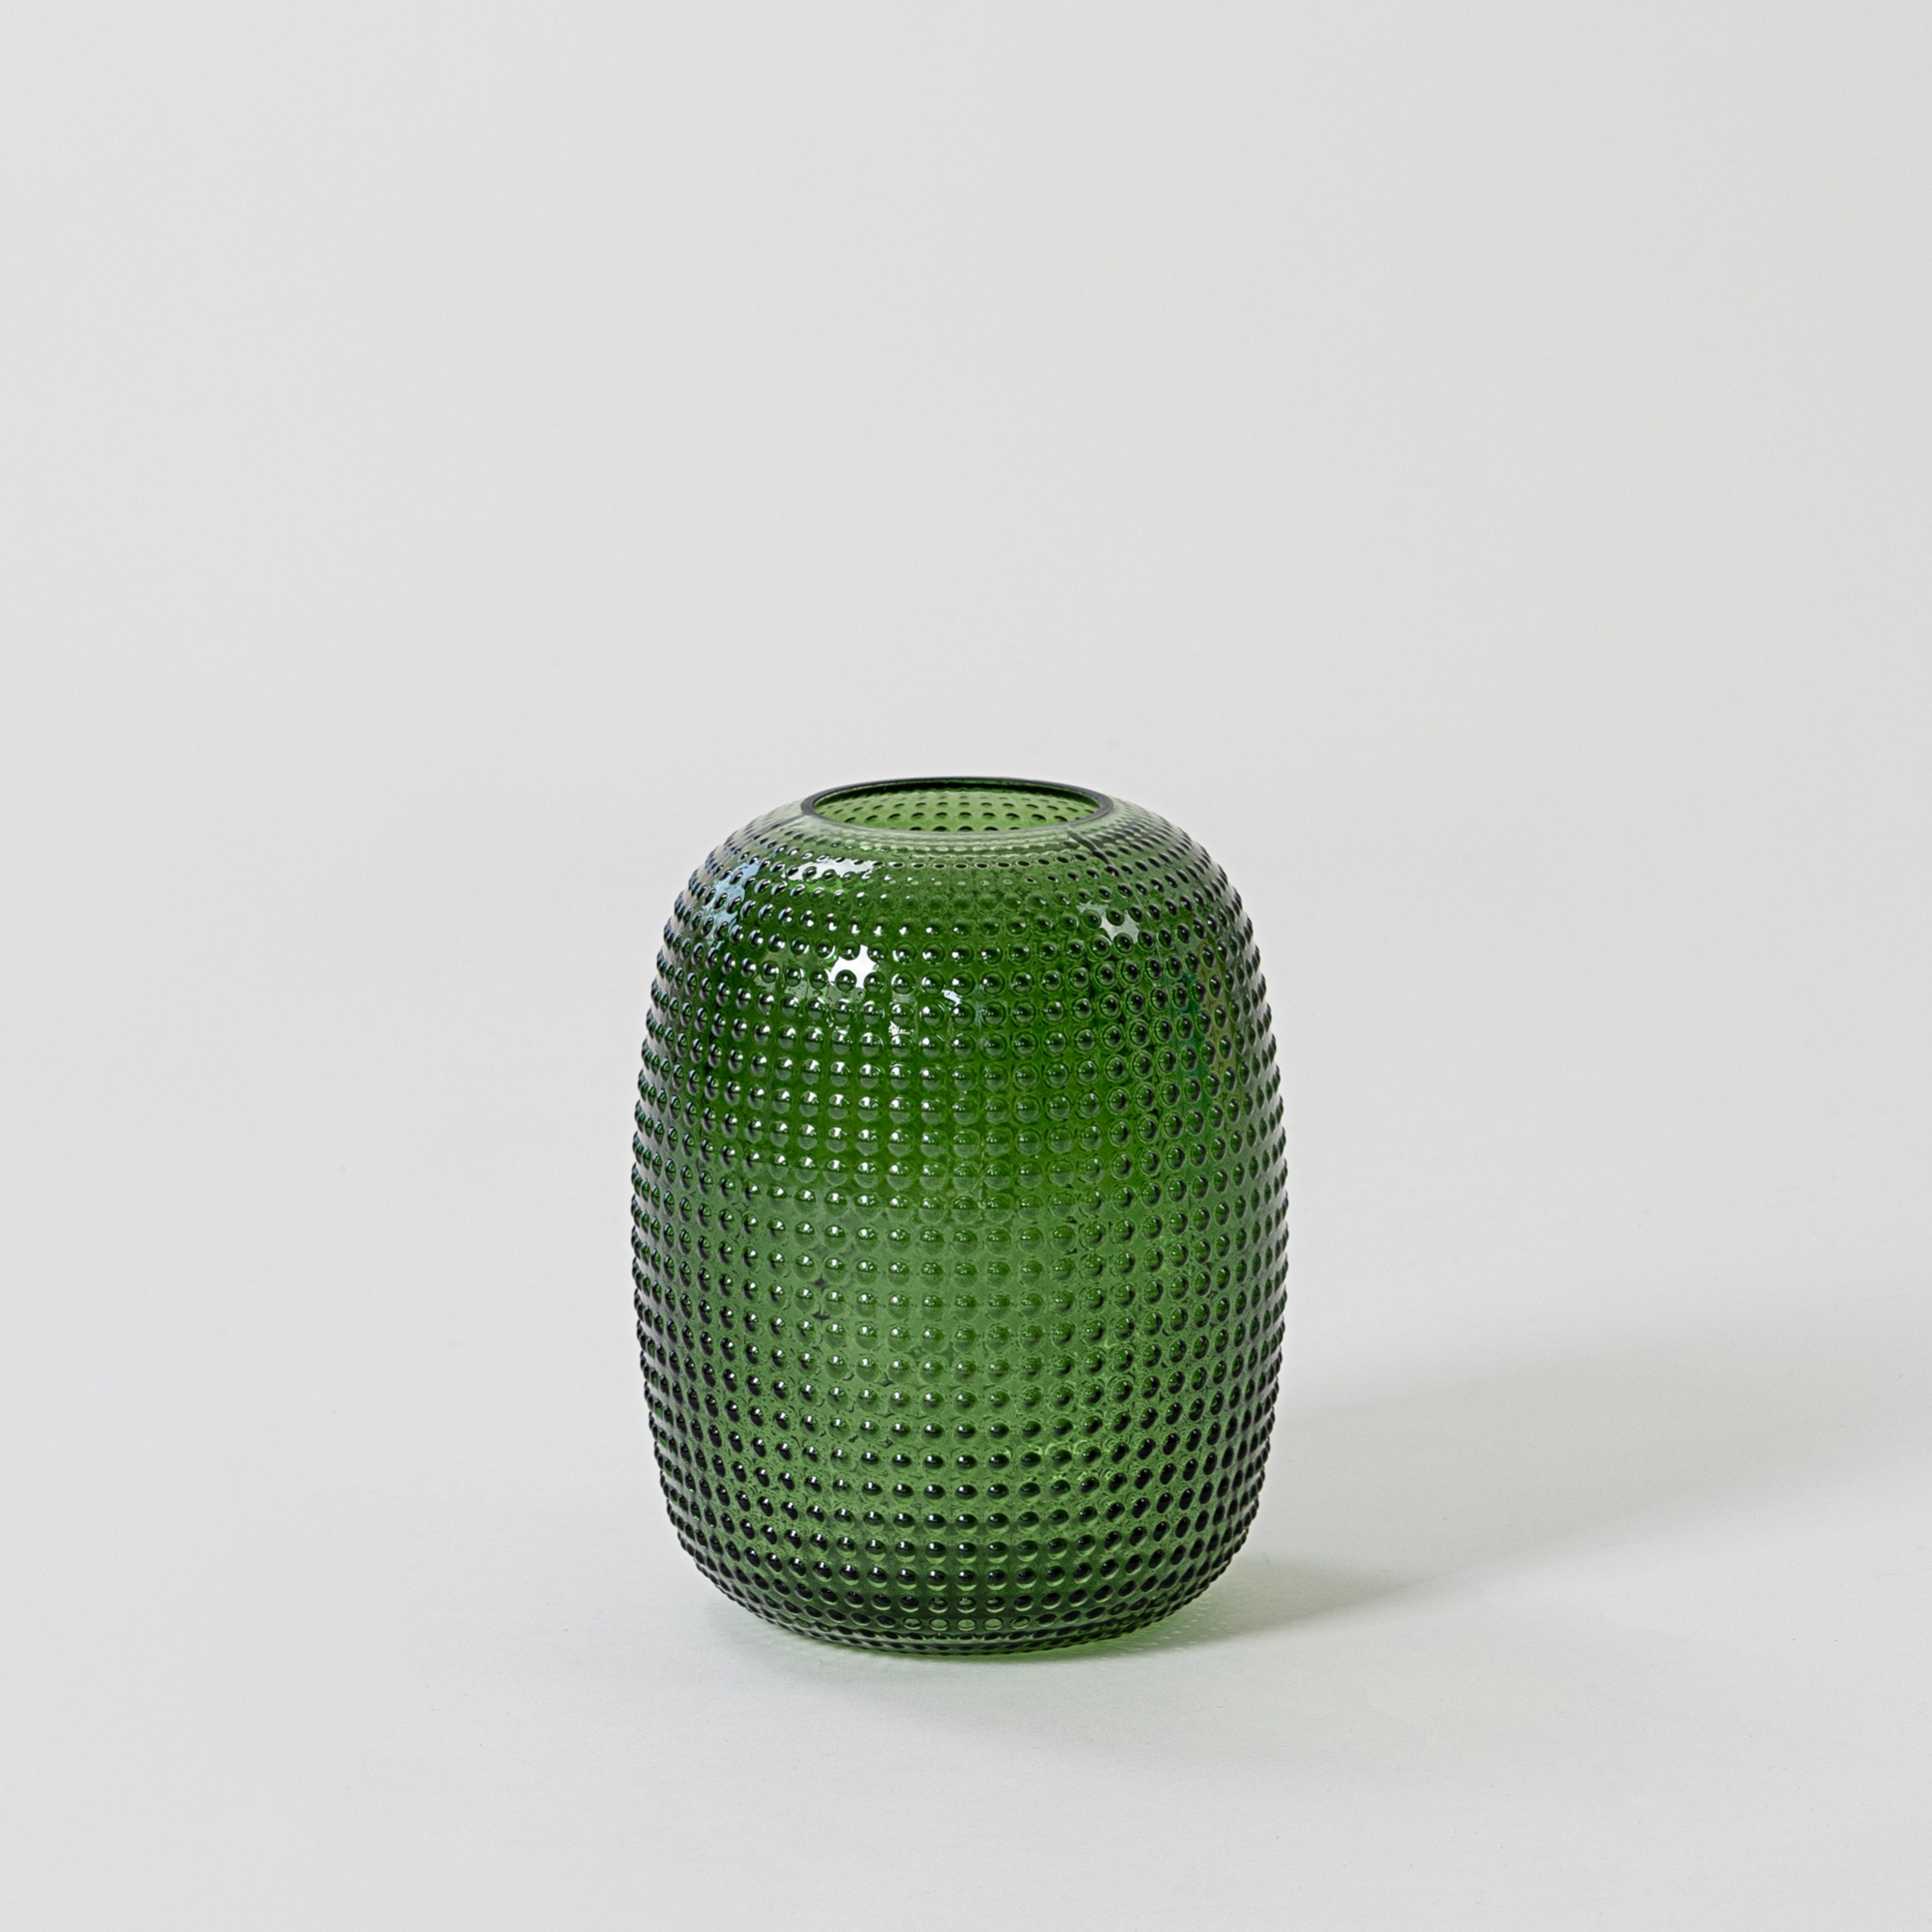 &amp;klevering Vase - Dotted Green Small